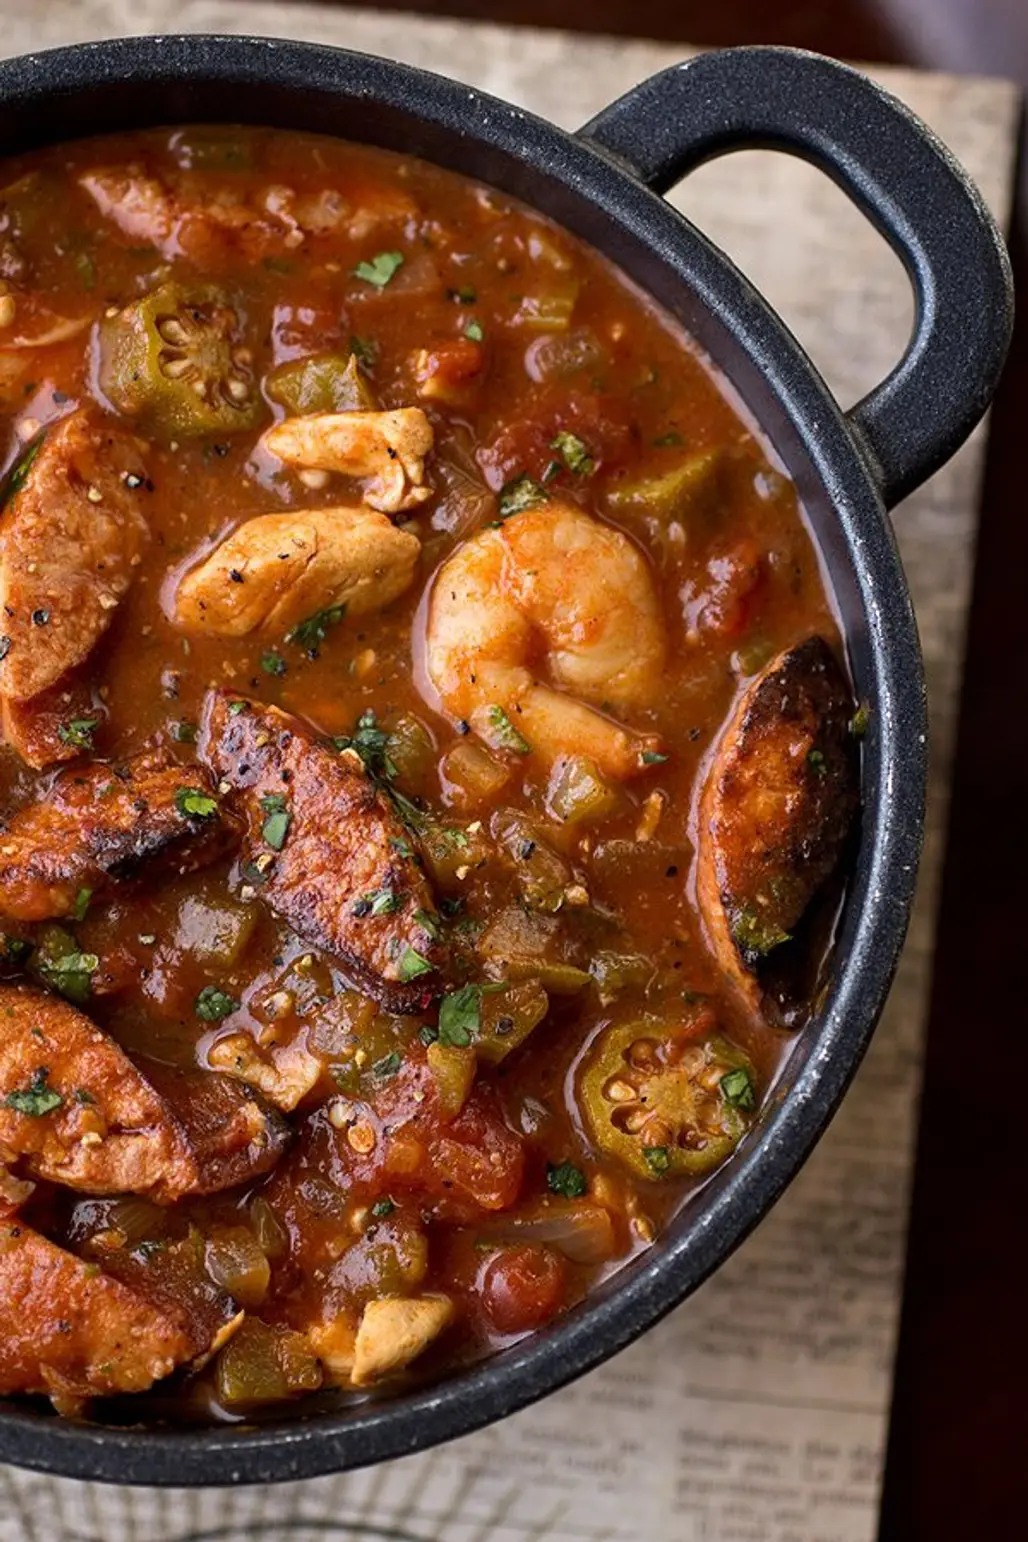 Gumbo is Your Top Choice